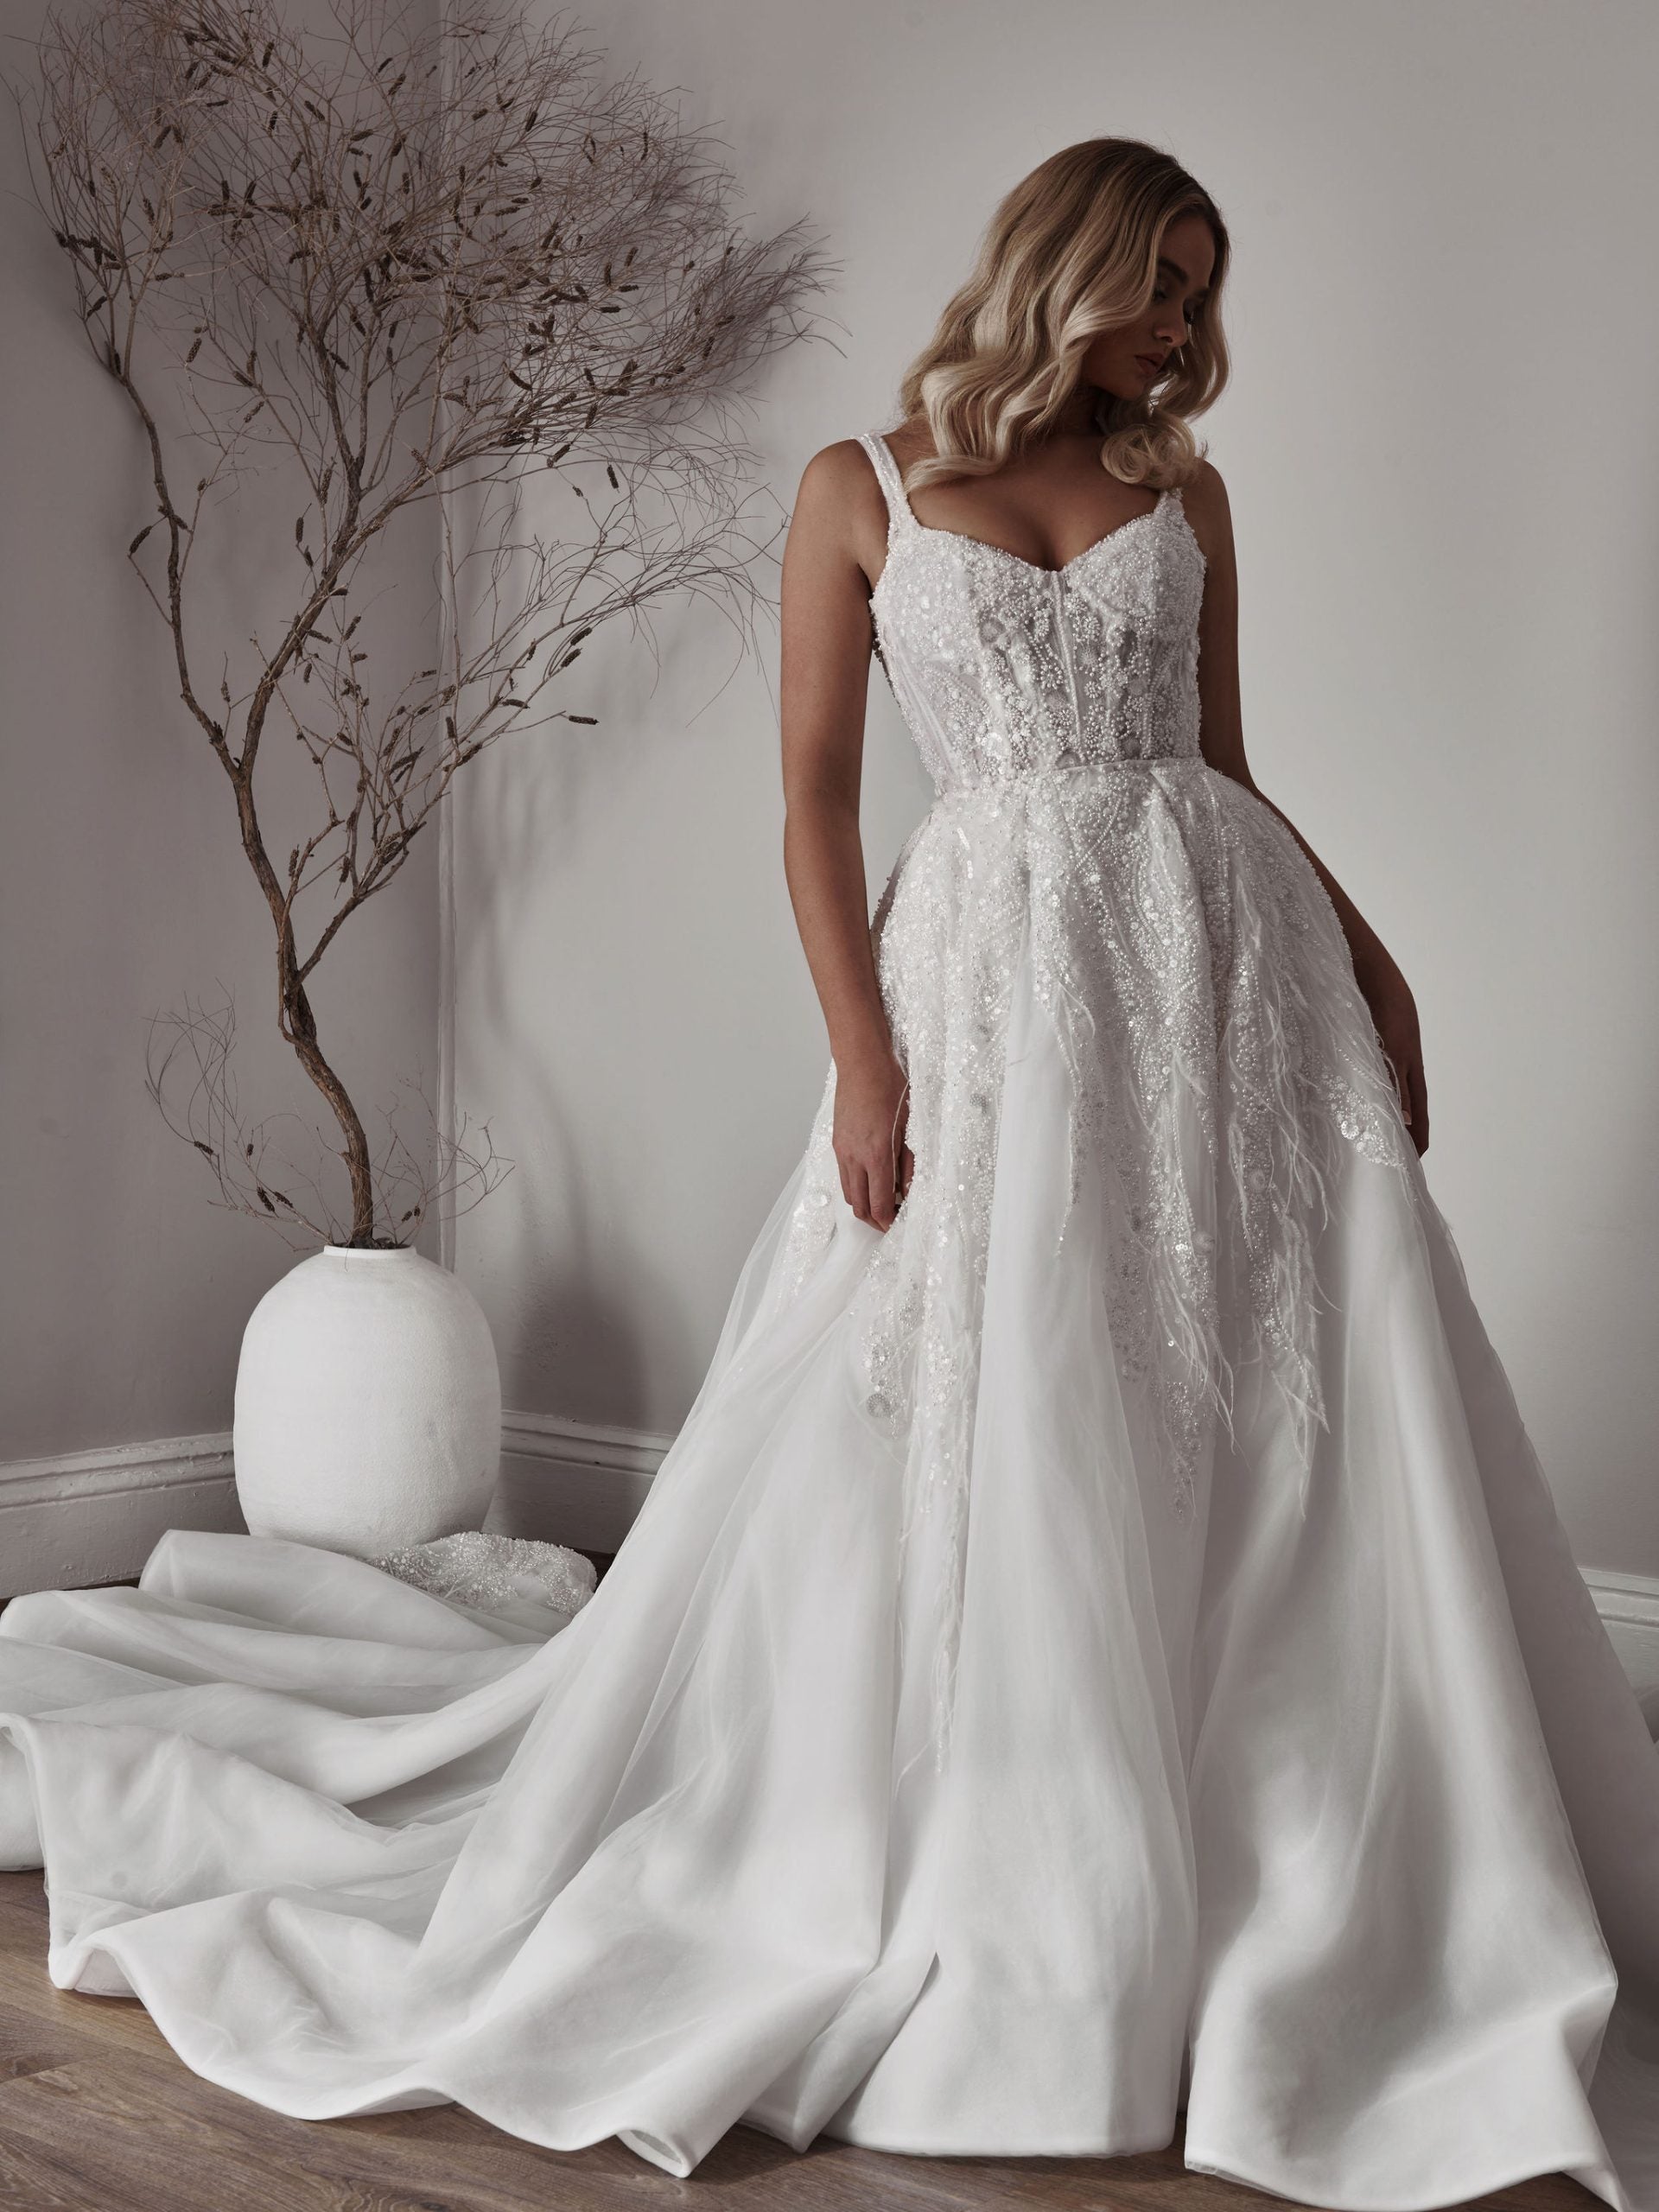 Beaded Detachable Overskirt by Blanche Bridal - Image 3